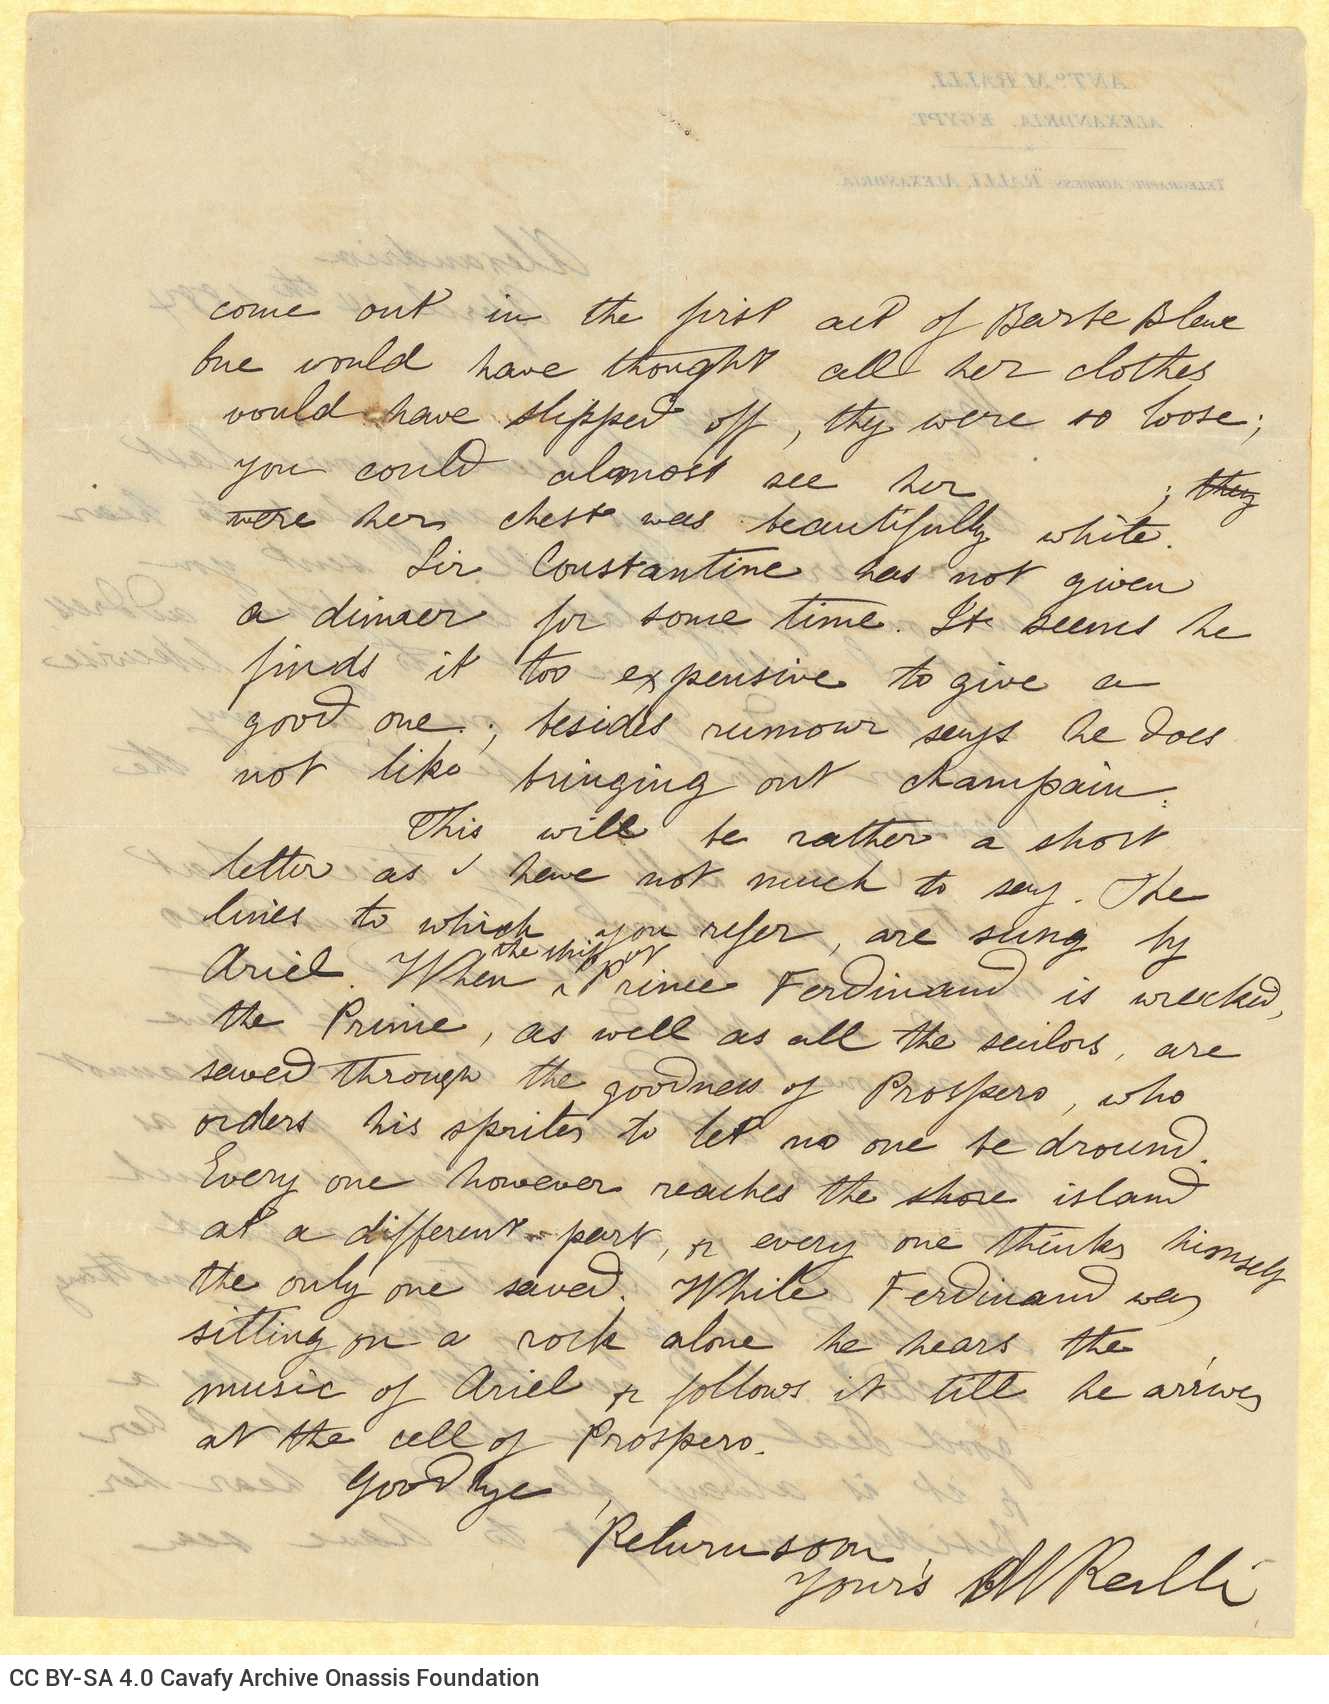 Handwritten letter by Mike Ralli to Cavafy on both sides of a sheet. Description of the work "La Barbe bleue" –possibly in 